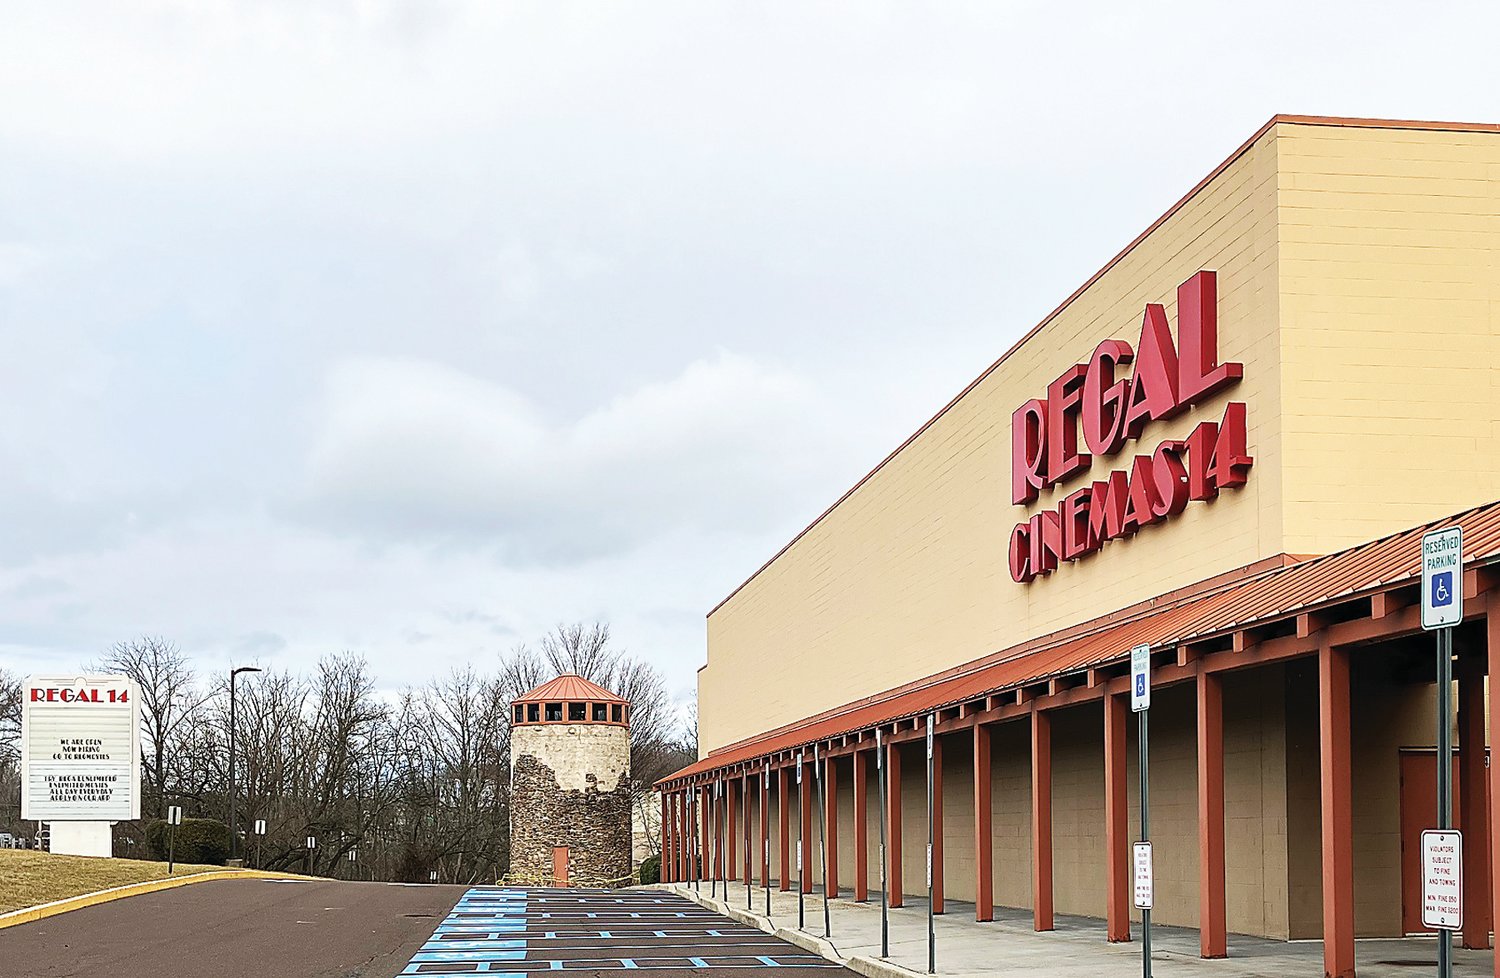 The Regal Barn Plaza 14 movie theater, a longtime staple for Doylestown area moviegoers, is closing.